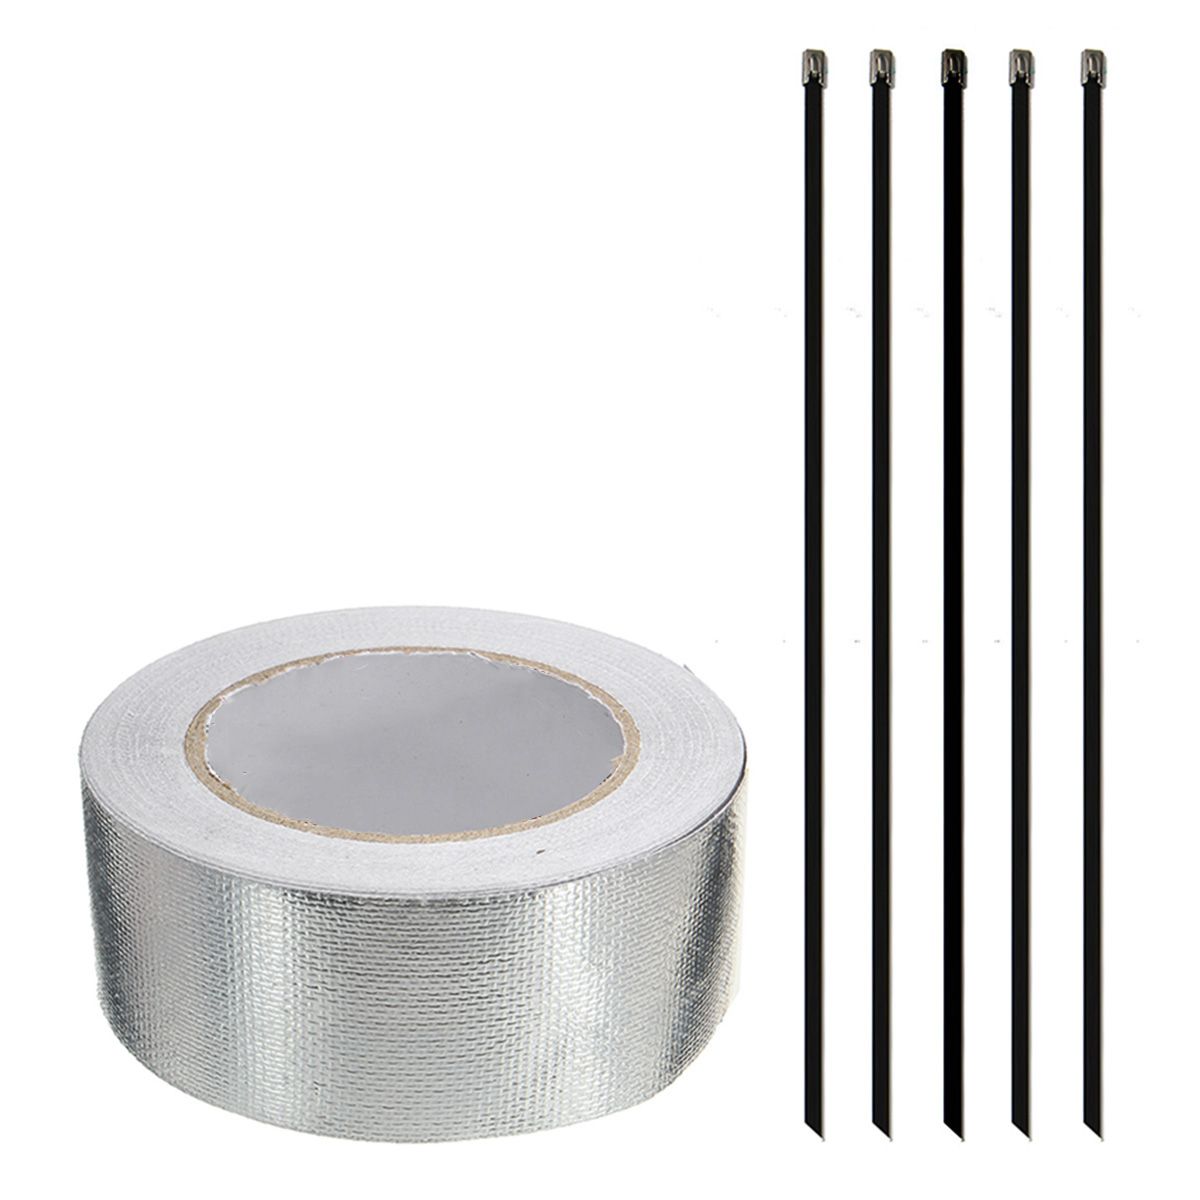 Aluminum-Reinforced-Tape-Heat-Shield-Adhesive-Backed-Resistant-Wrap-Intake-1149250